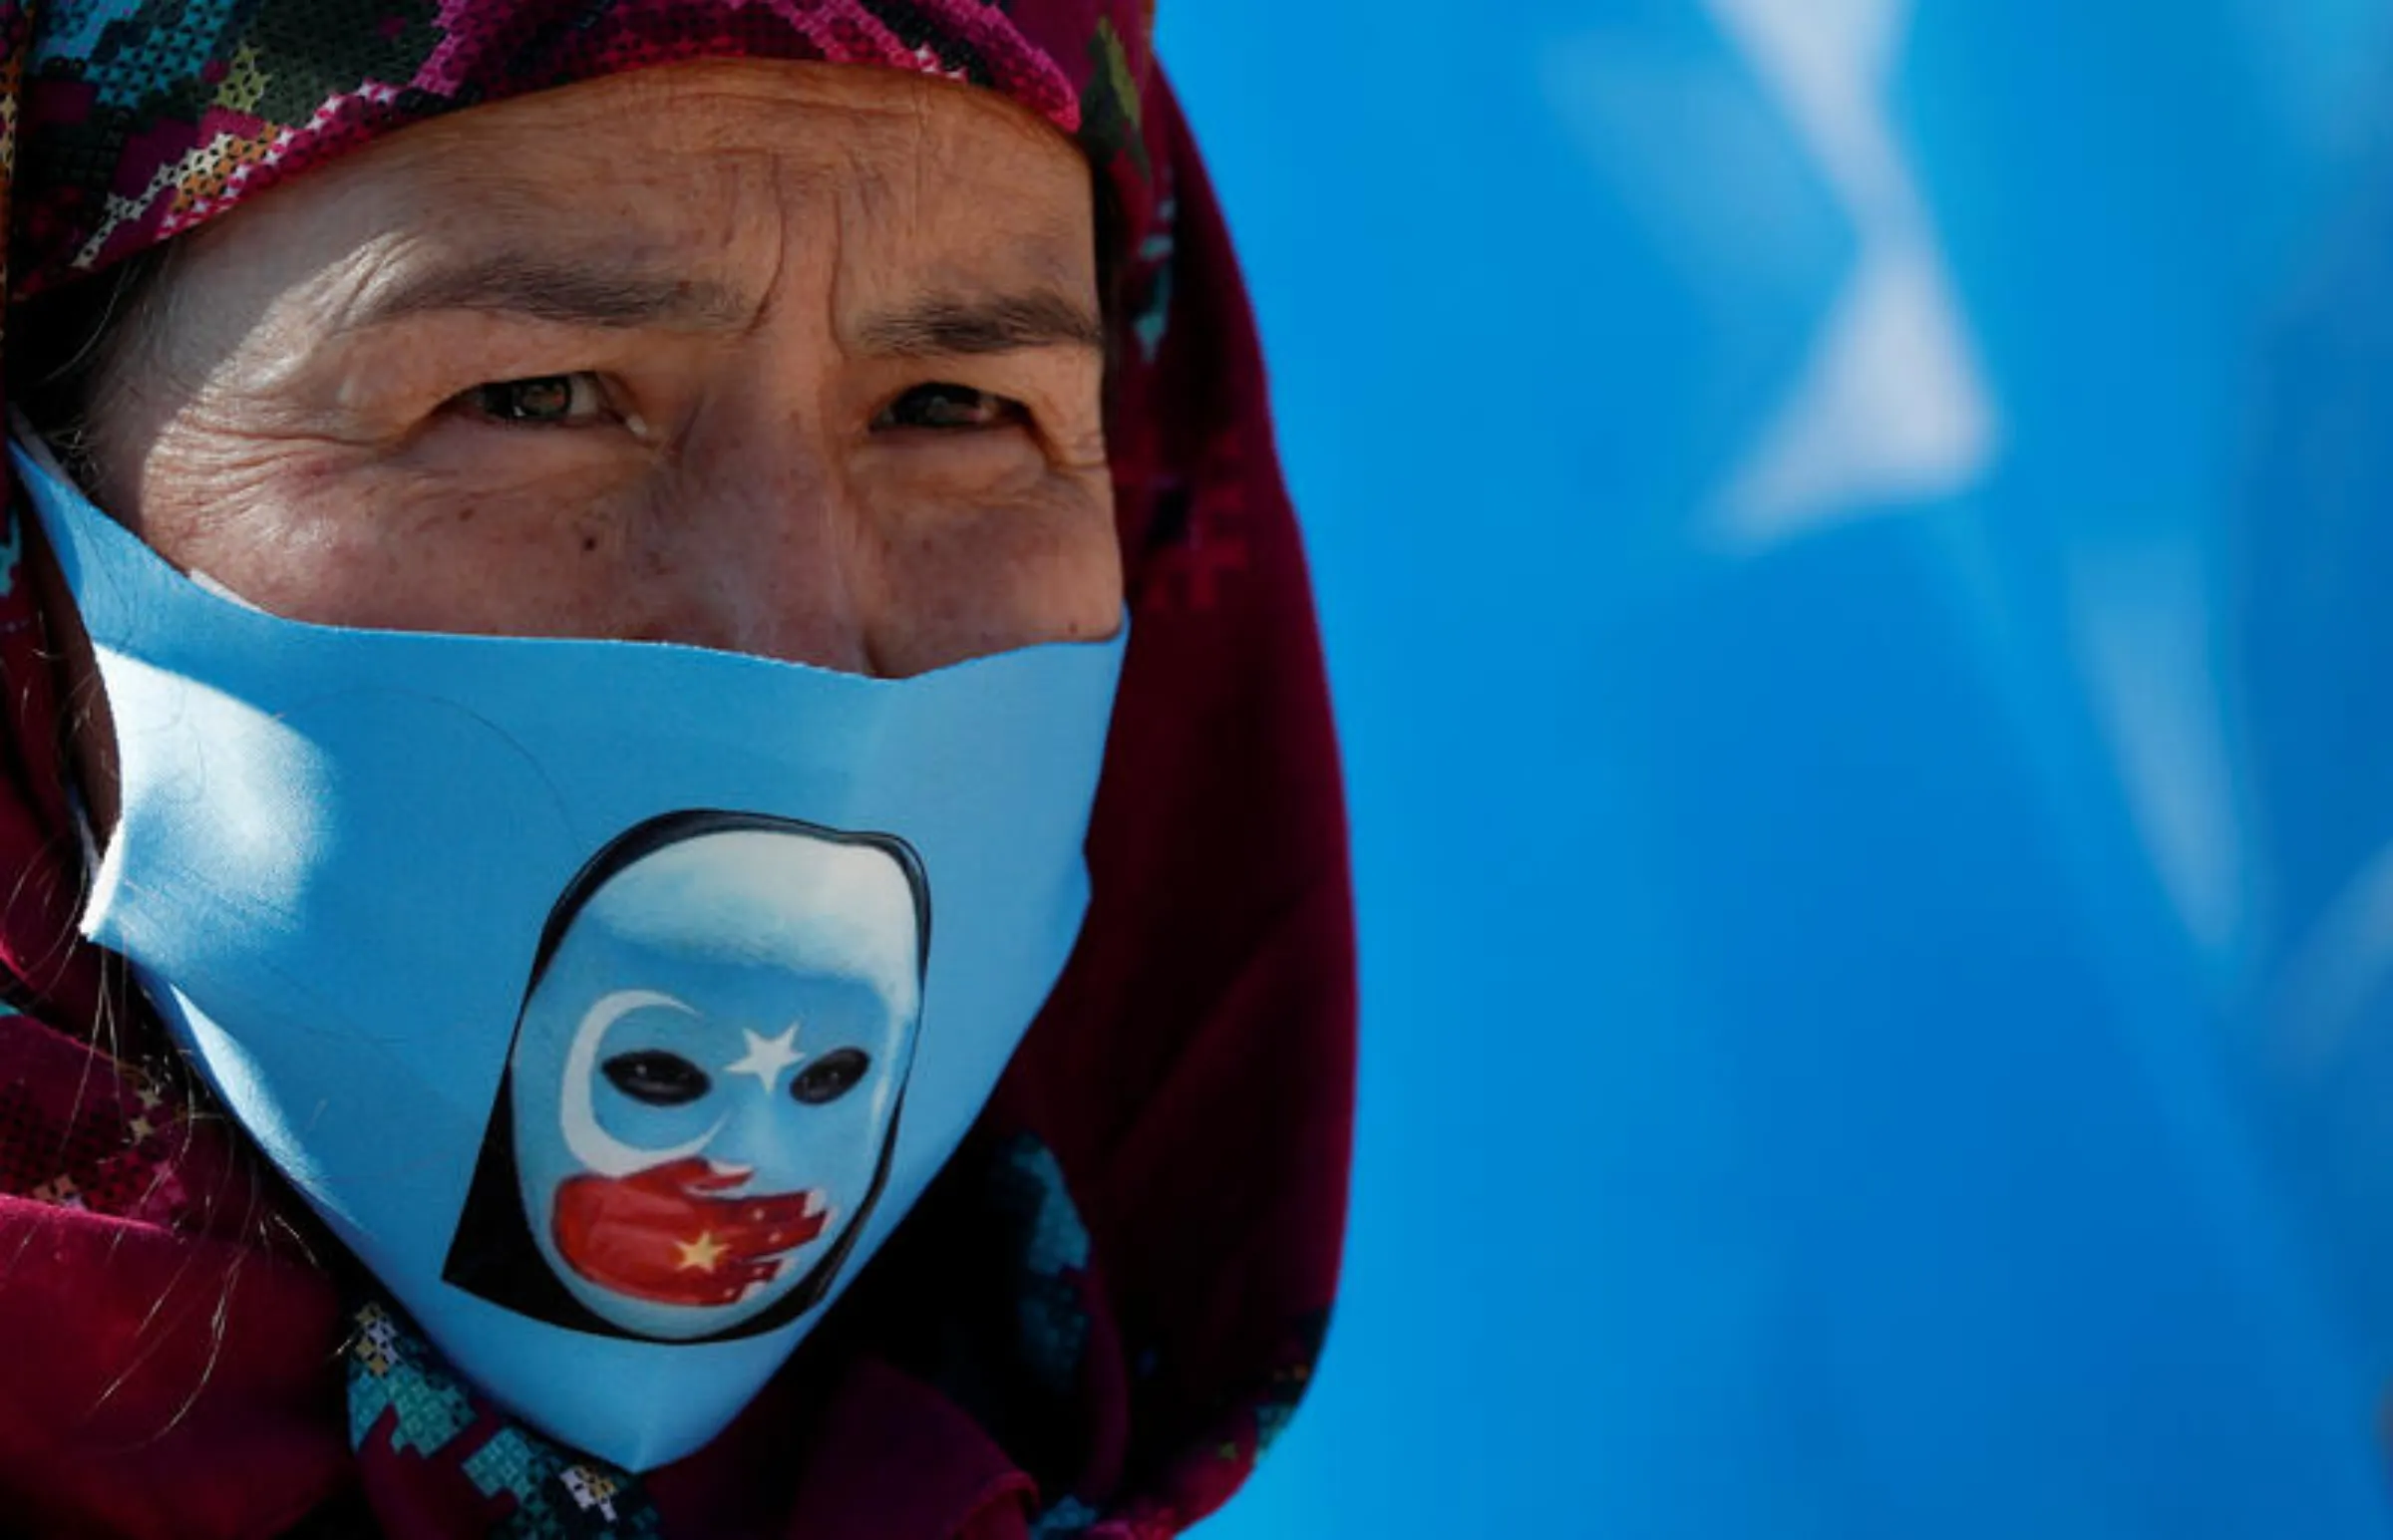 An Ethnic Uighur demonstrator wearing a protective face mask takes part in a protest against China, in Istanbul, Turkey October 1, 2020. REUTERS/Murad Sezer